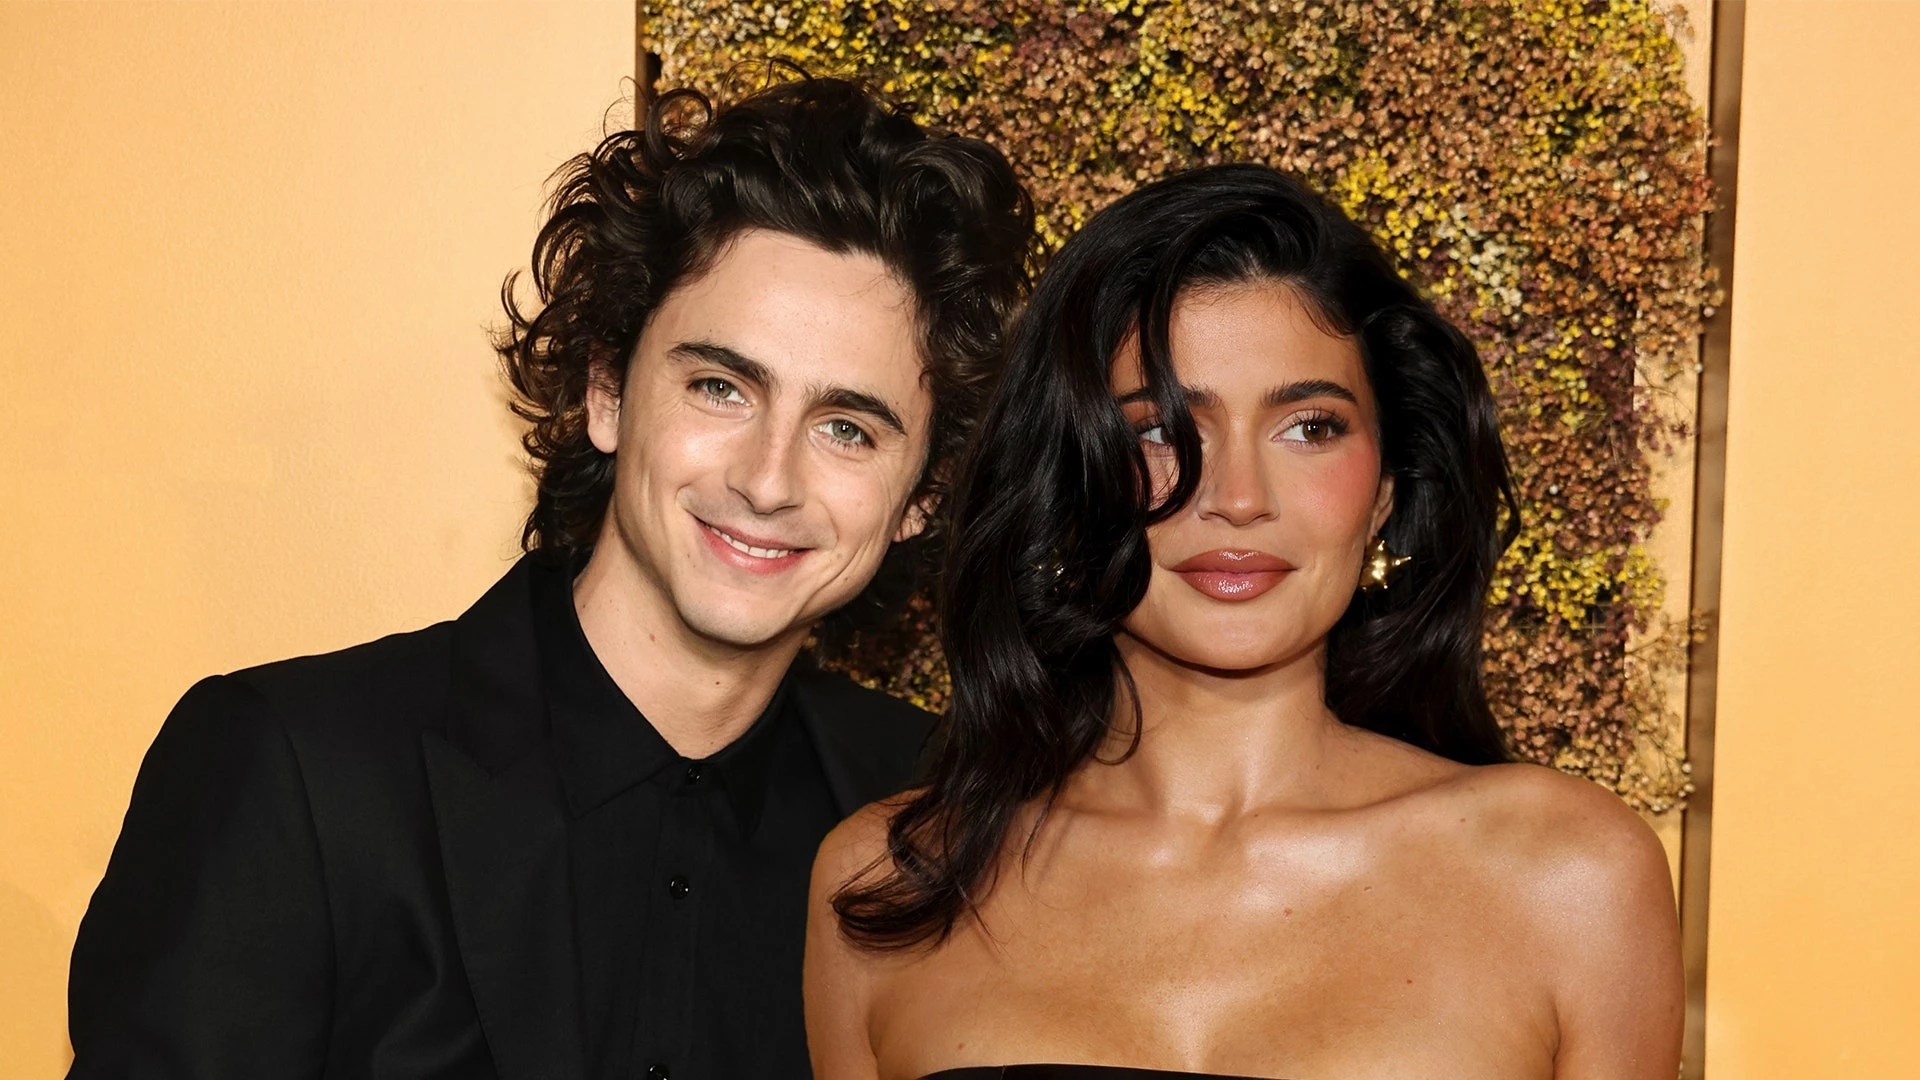 Inside Kylie's And Timothee's Private Relationship